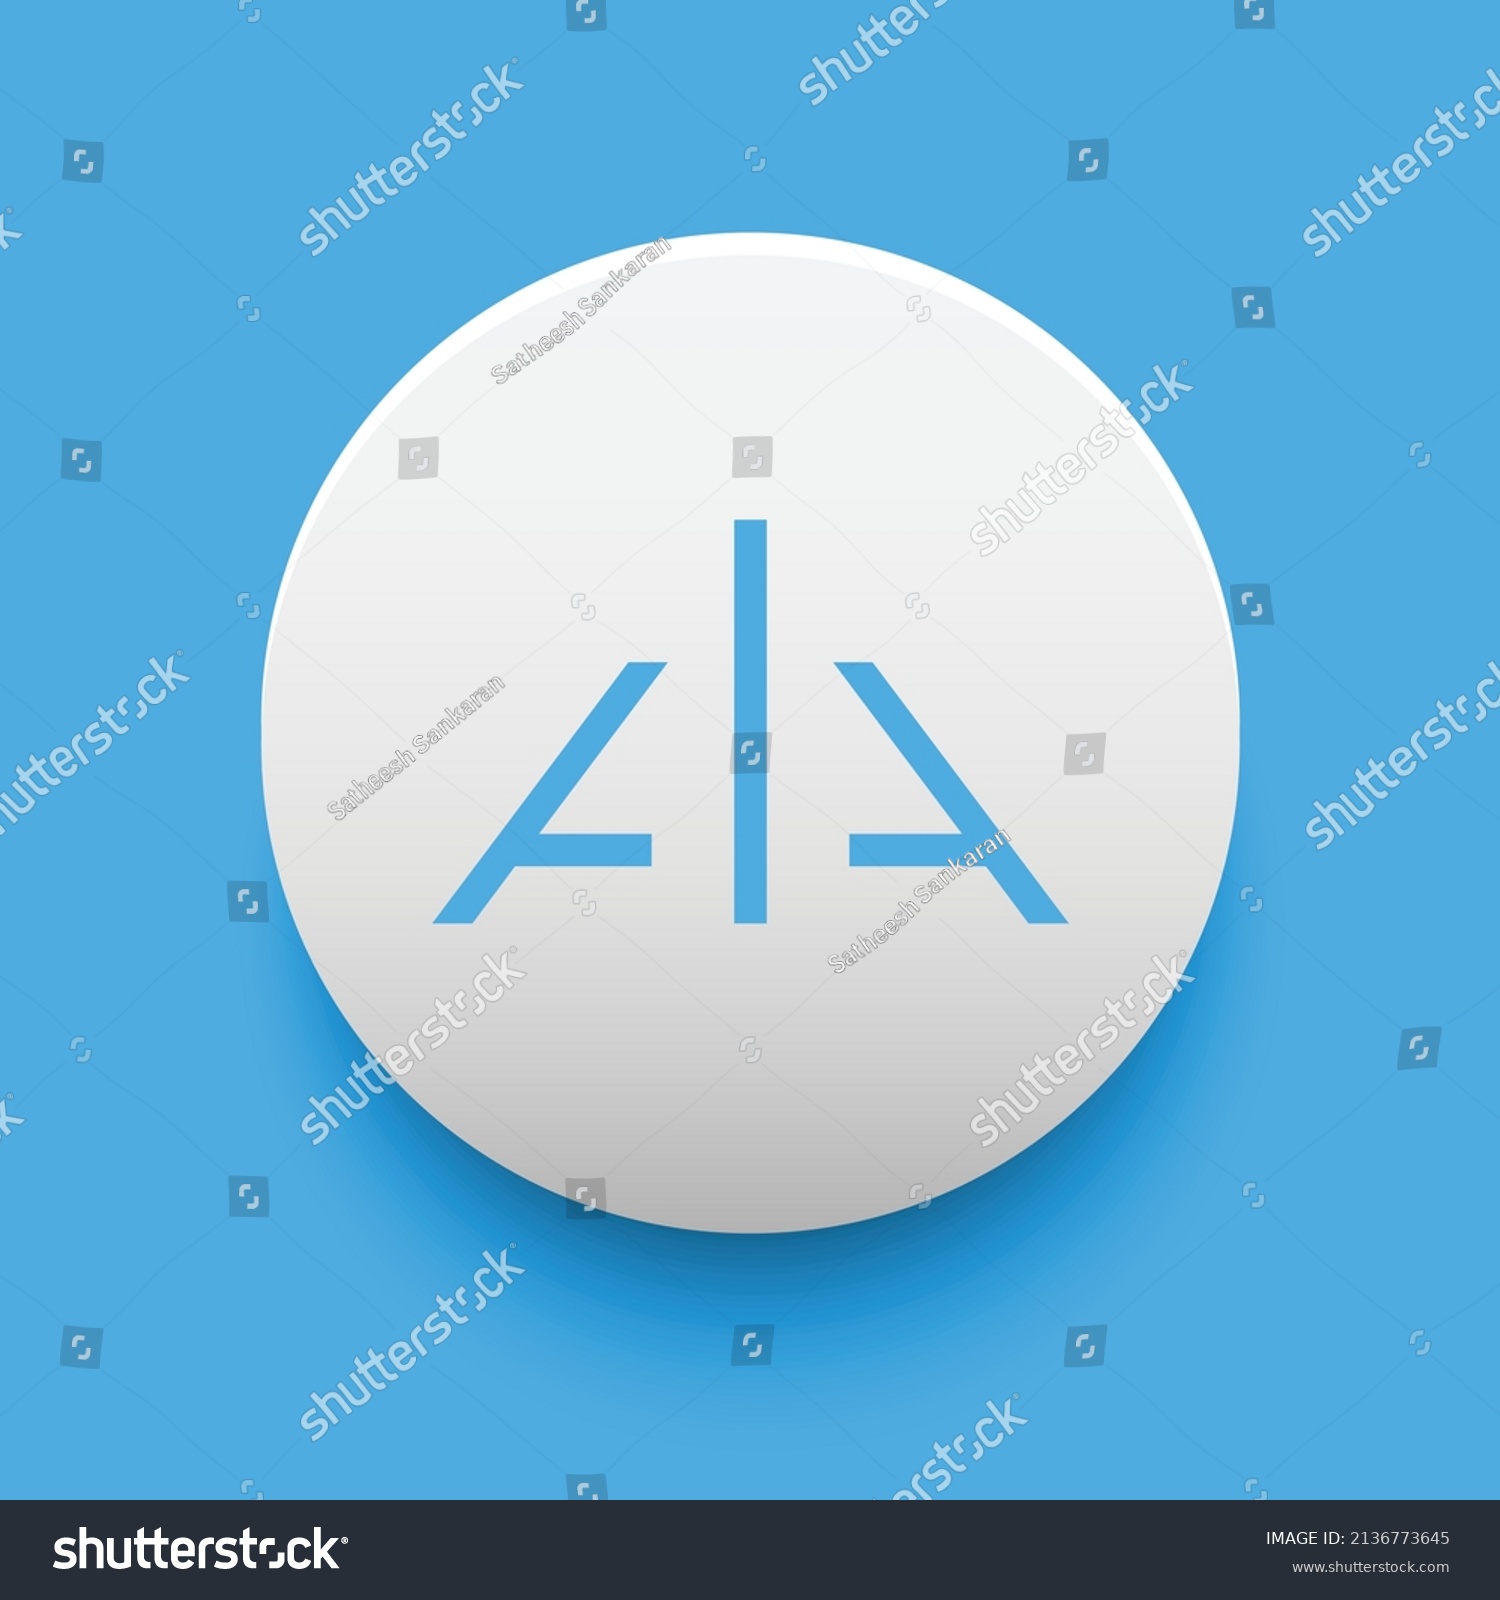 SVG of Blockchain based secure Cryptocurrency coin Alpha Finance Lab (ALPHA) icon isolated on colored background. Digital virtual money tokens. Decentralized finance technology illustration. Altcoin Vector. svg